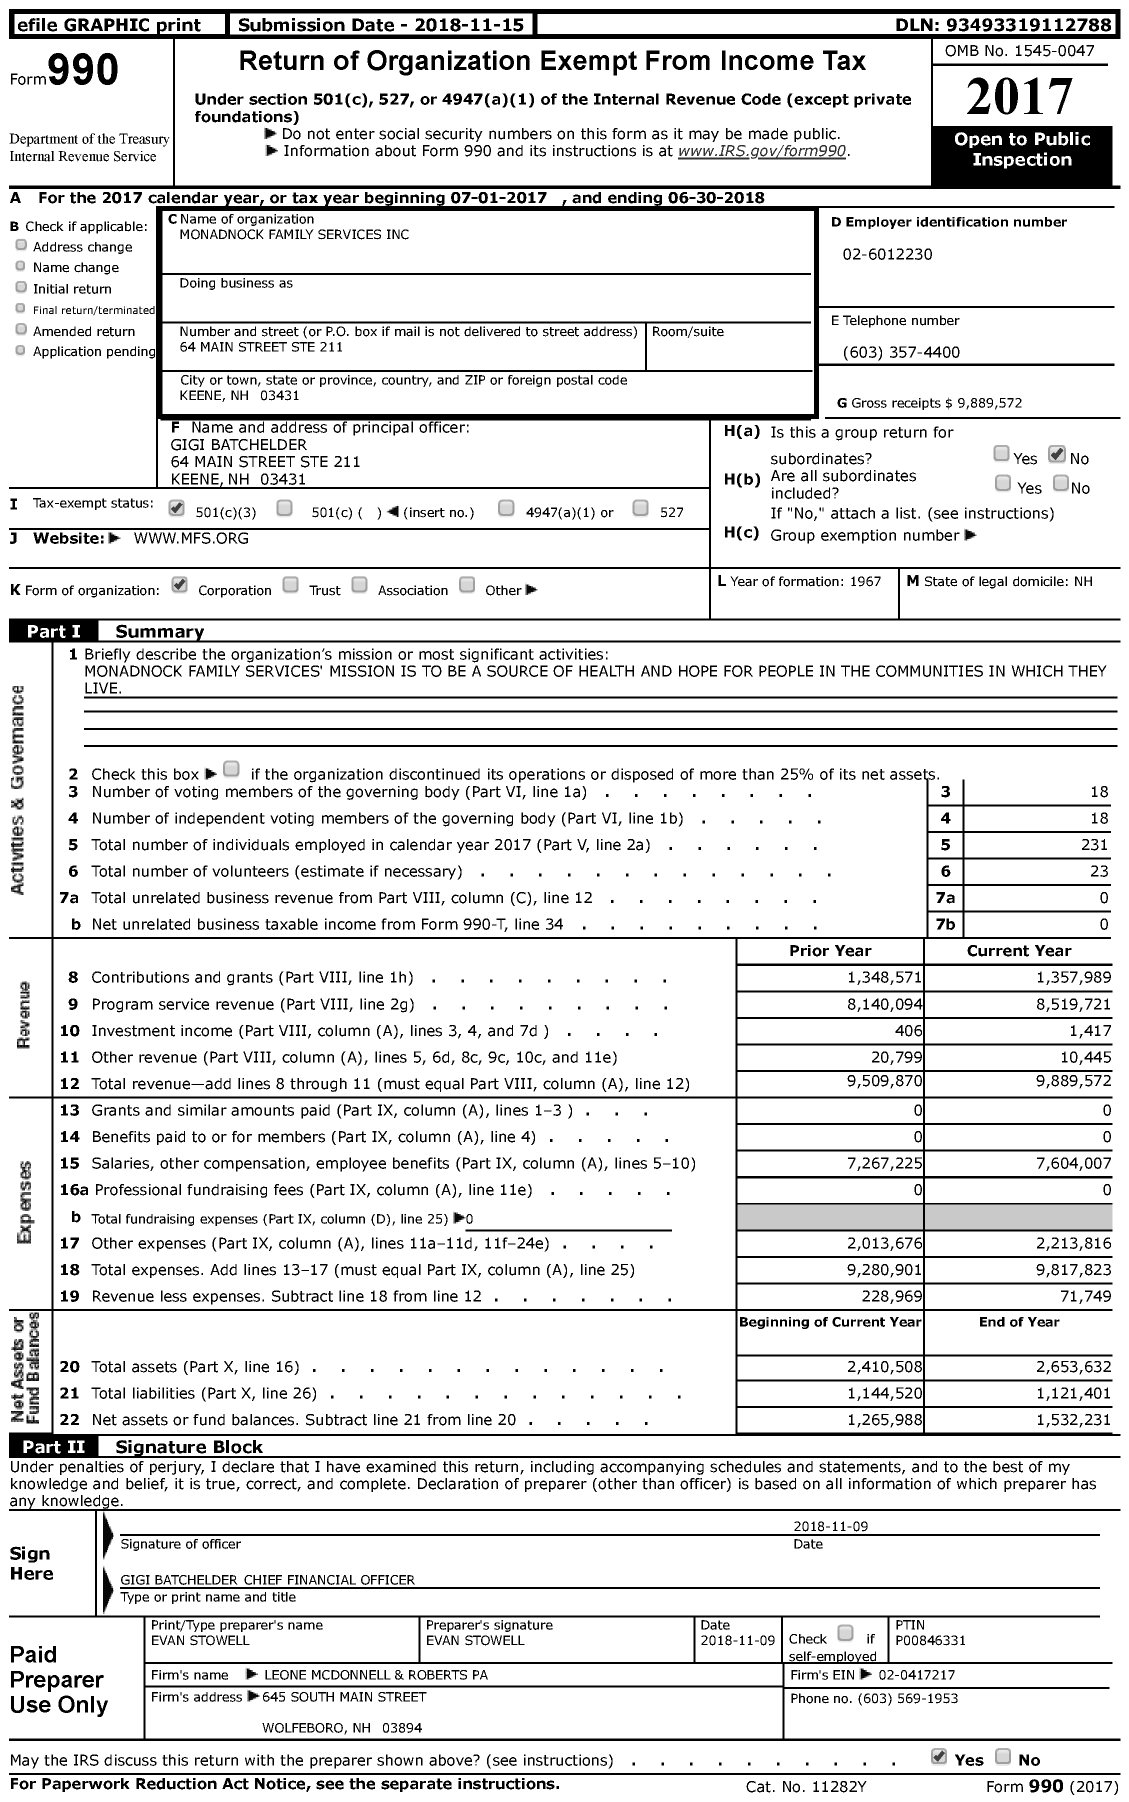 Image of first page of 2017 Form 990 for Monadnock Family Services (MFS)